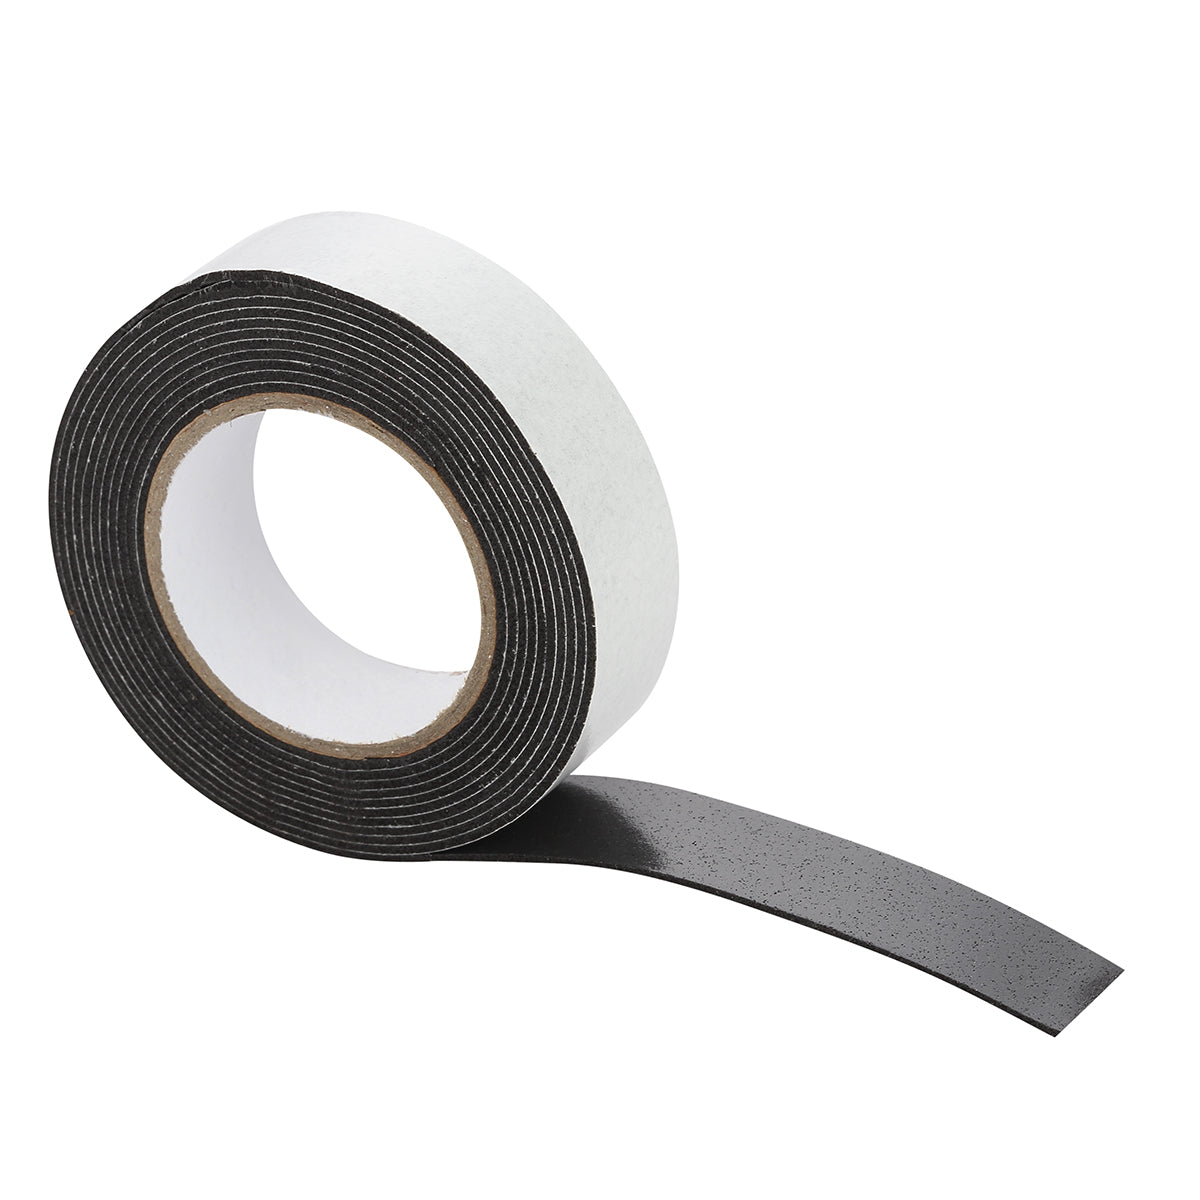 6-Piece Double Sided Mounting Tape - 1.8Cm X 2M